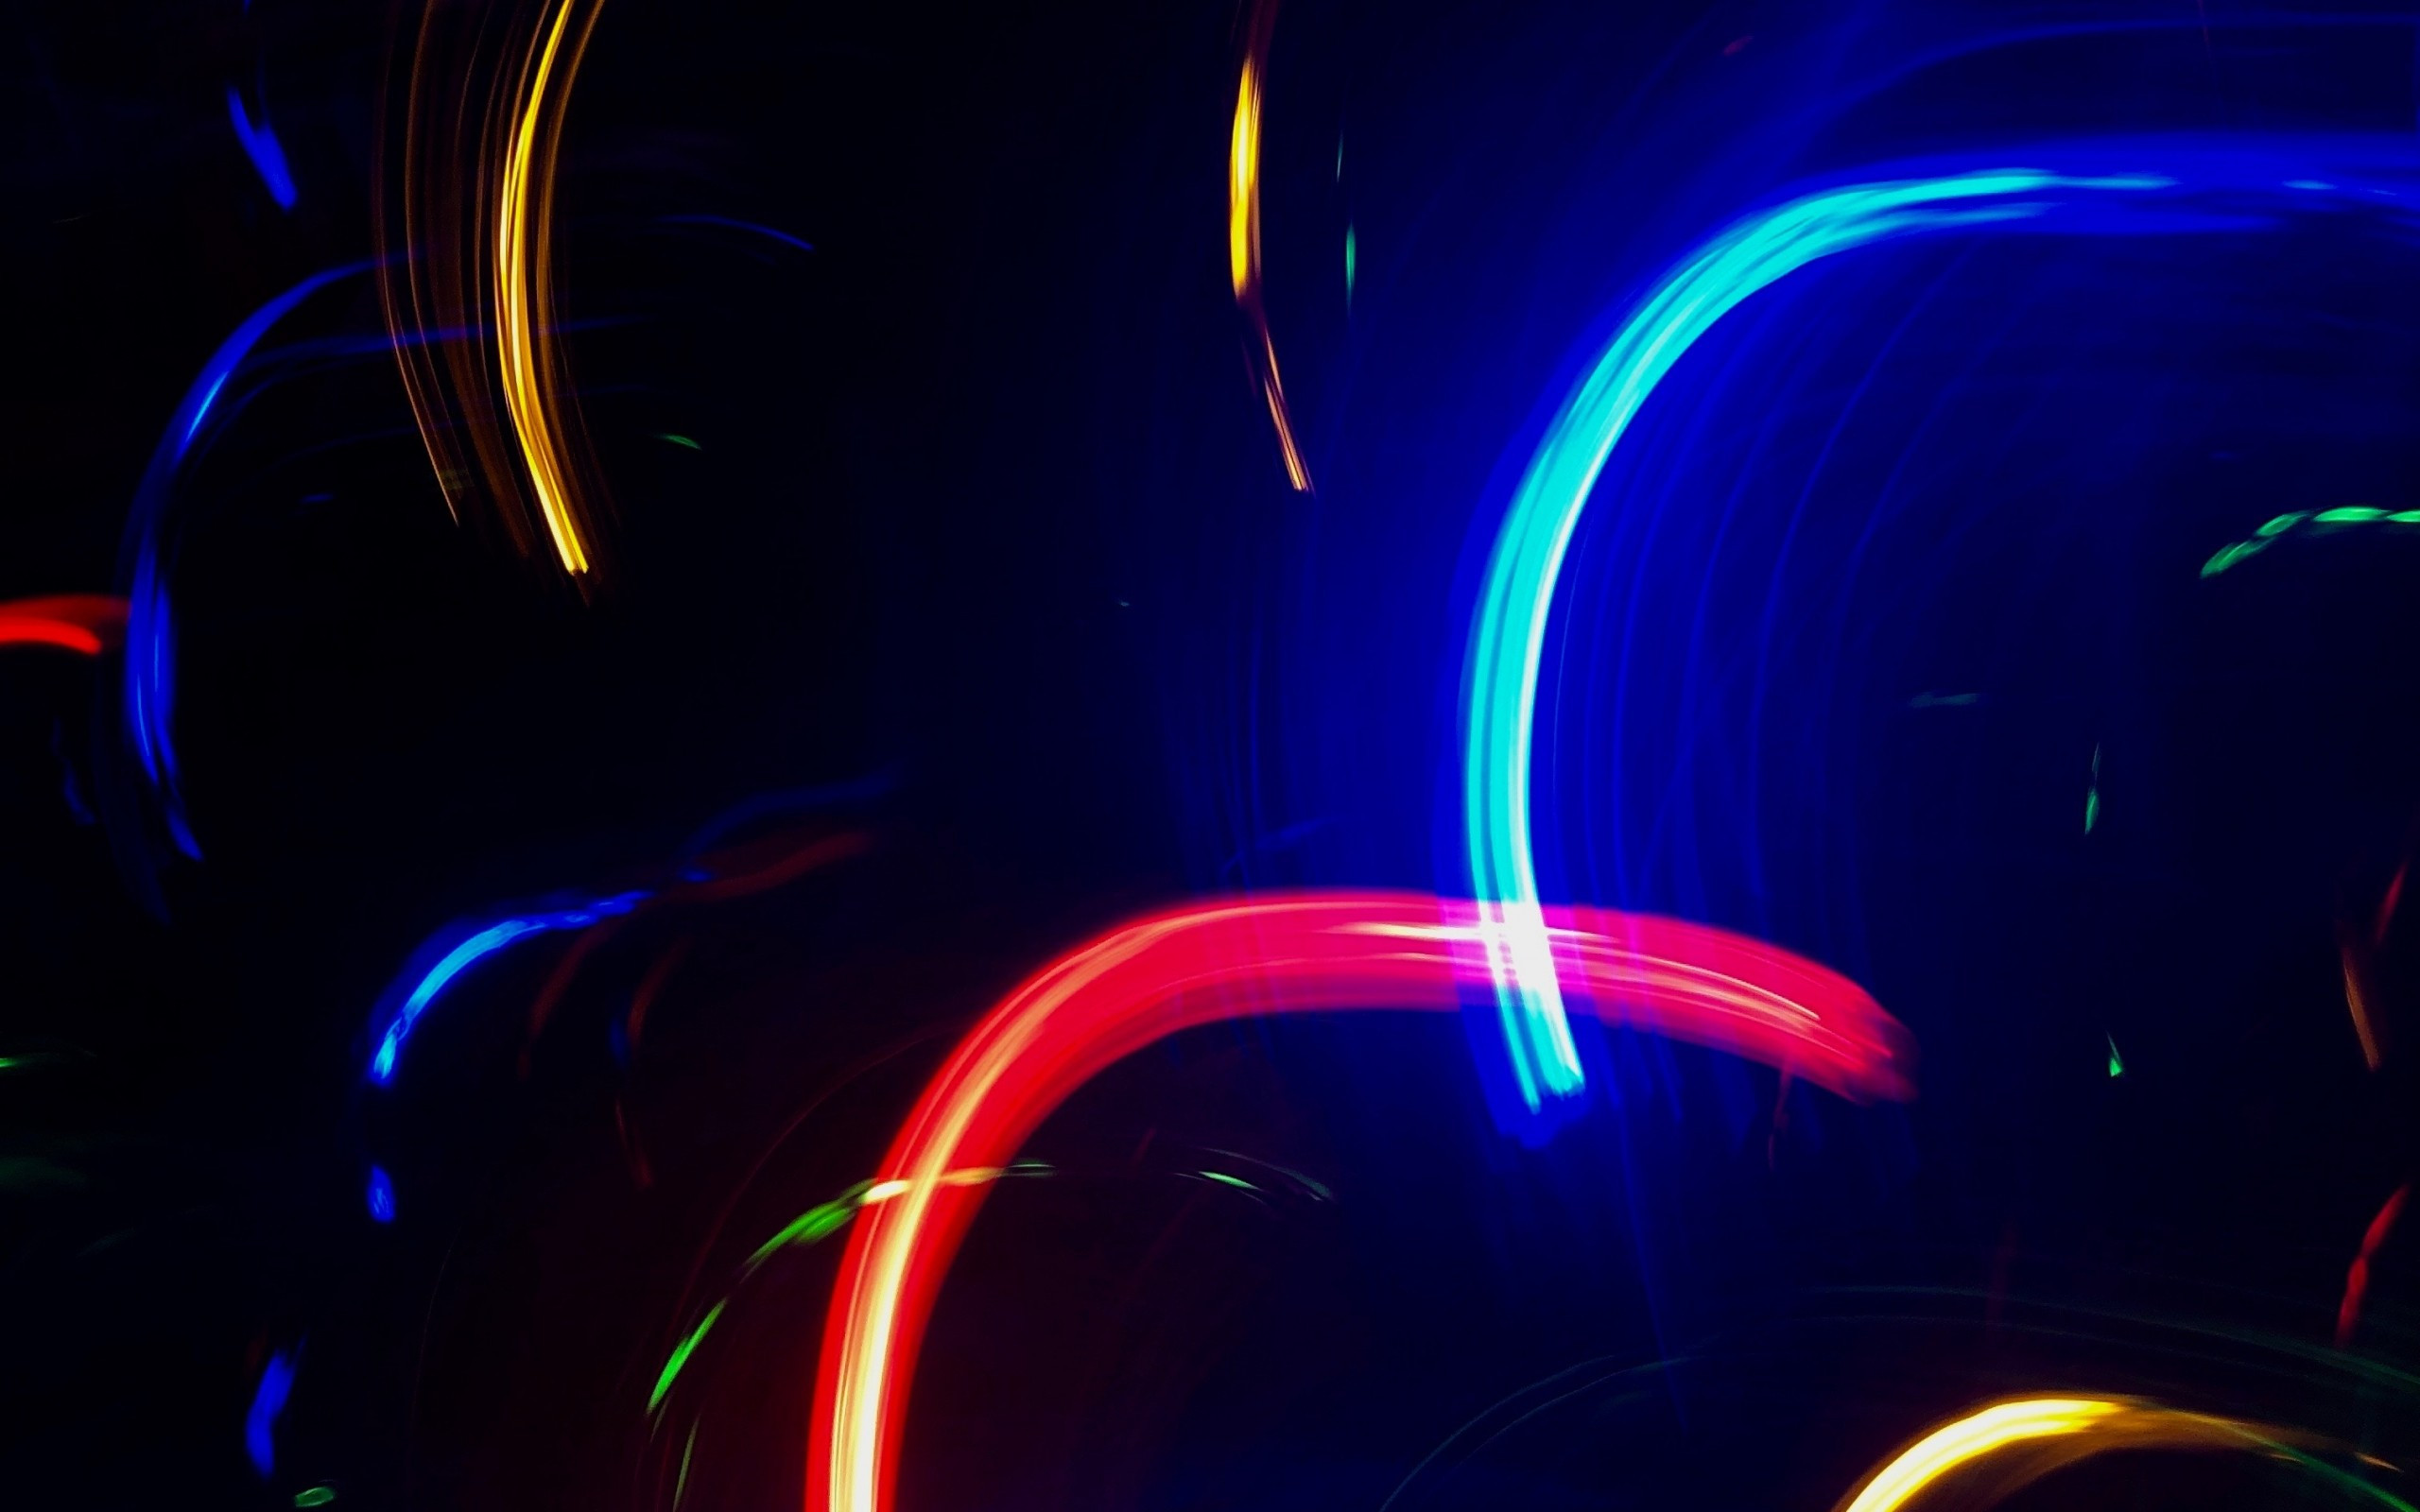 Download 2560x1600 Colorful Neon Lights Wallpaper for MacBook Pro 13 inch